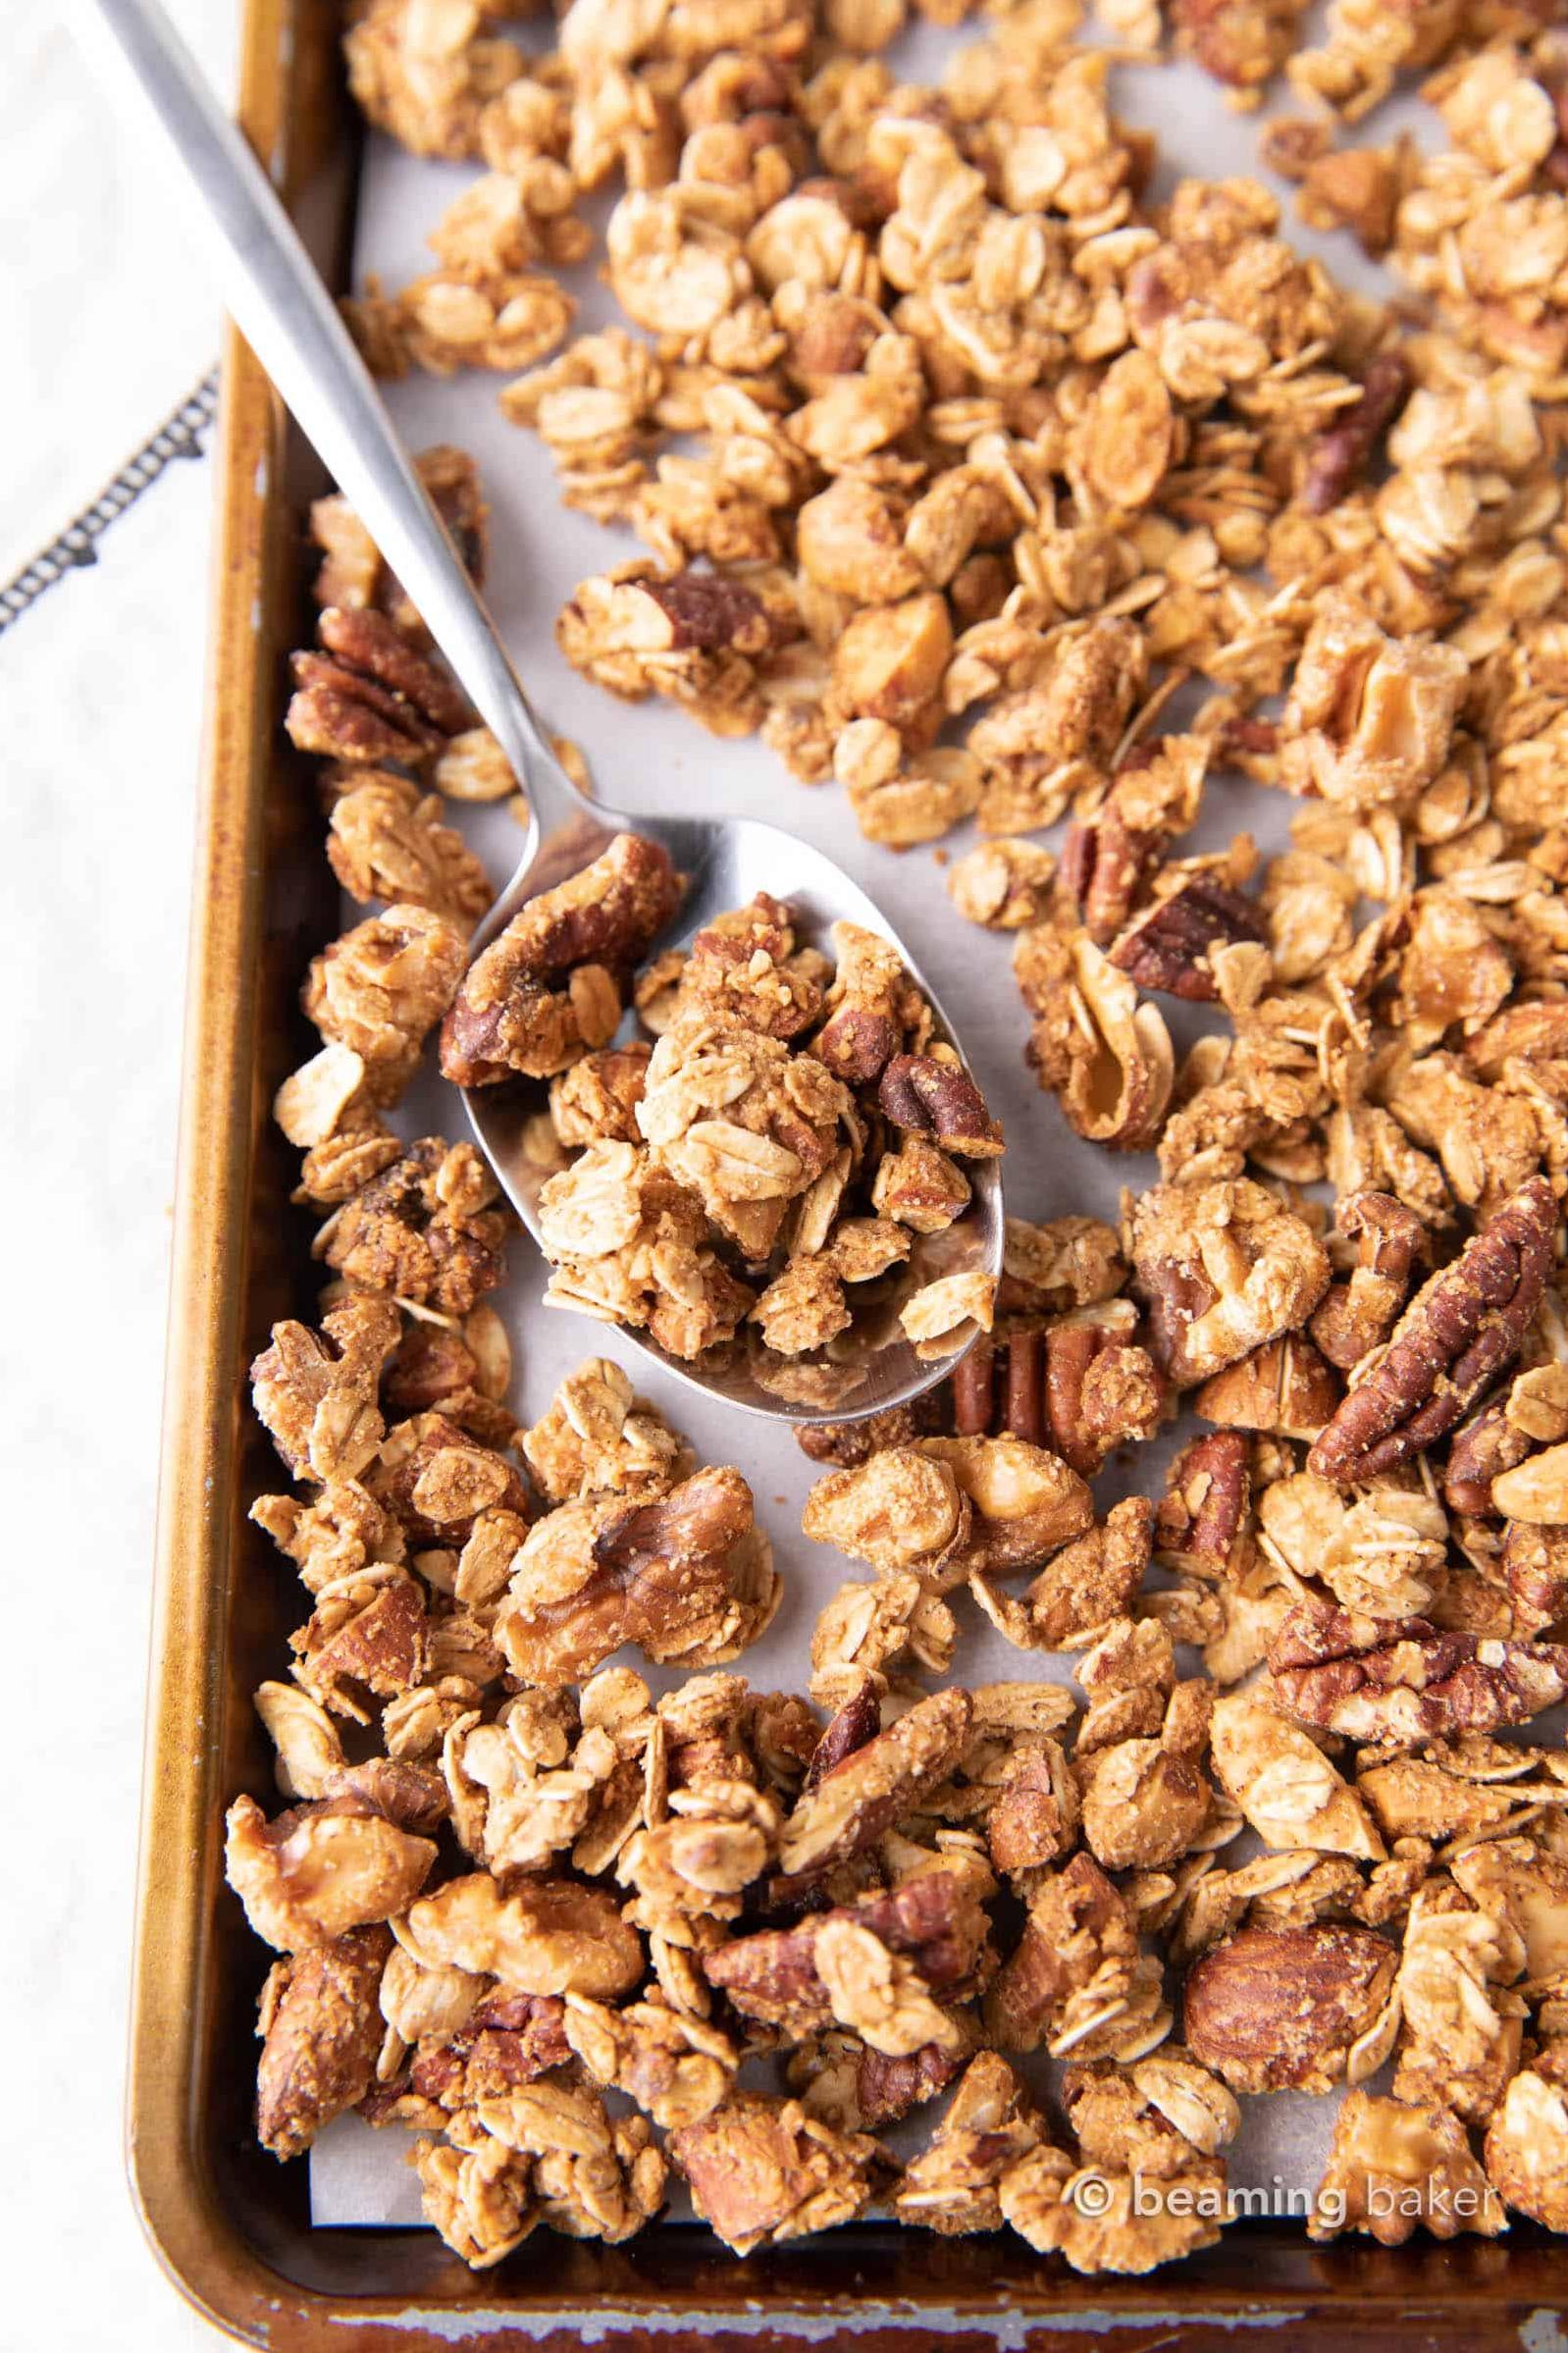  Start your day off right with this delicious gluten-free cereal!